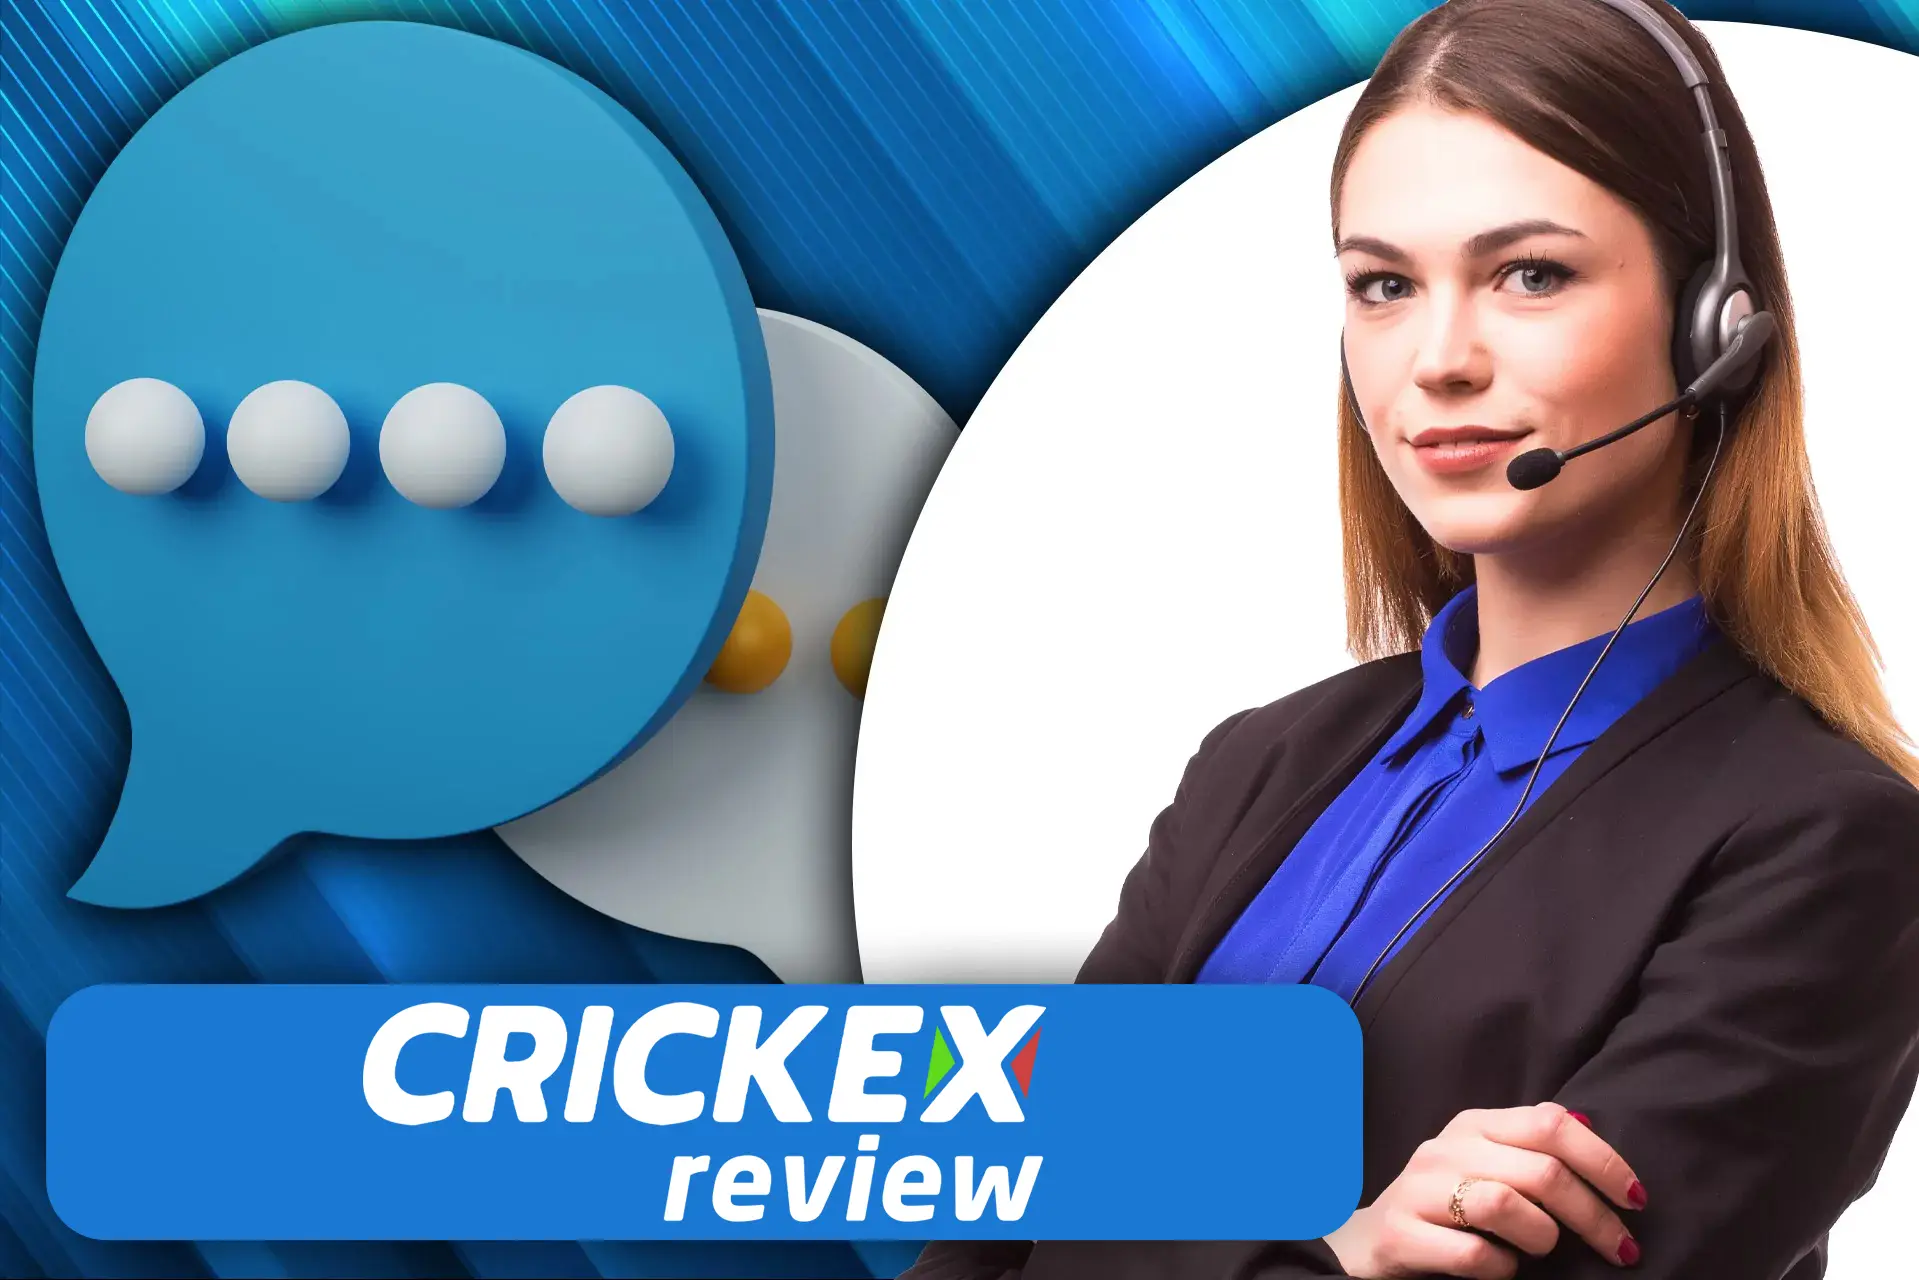 Crickex support team answers quickly on the site.